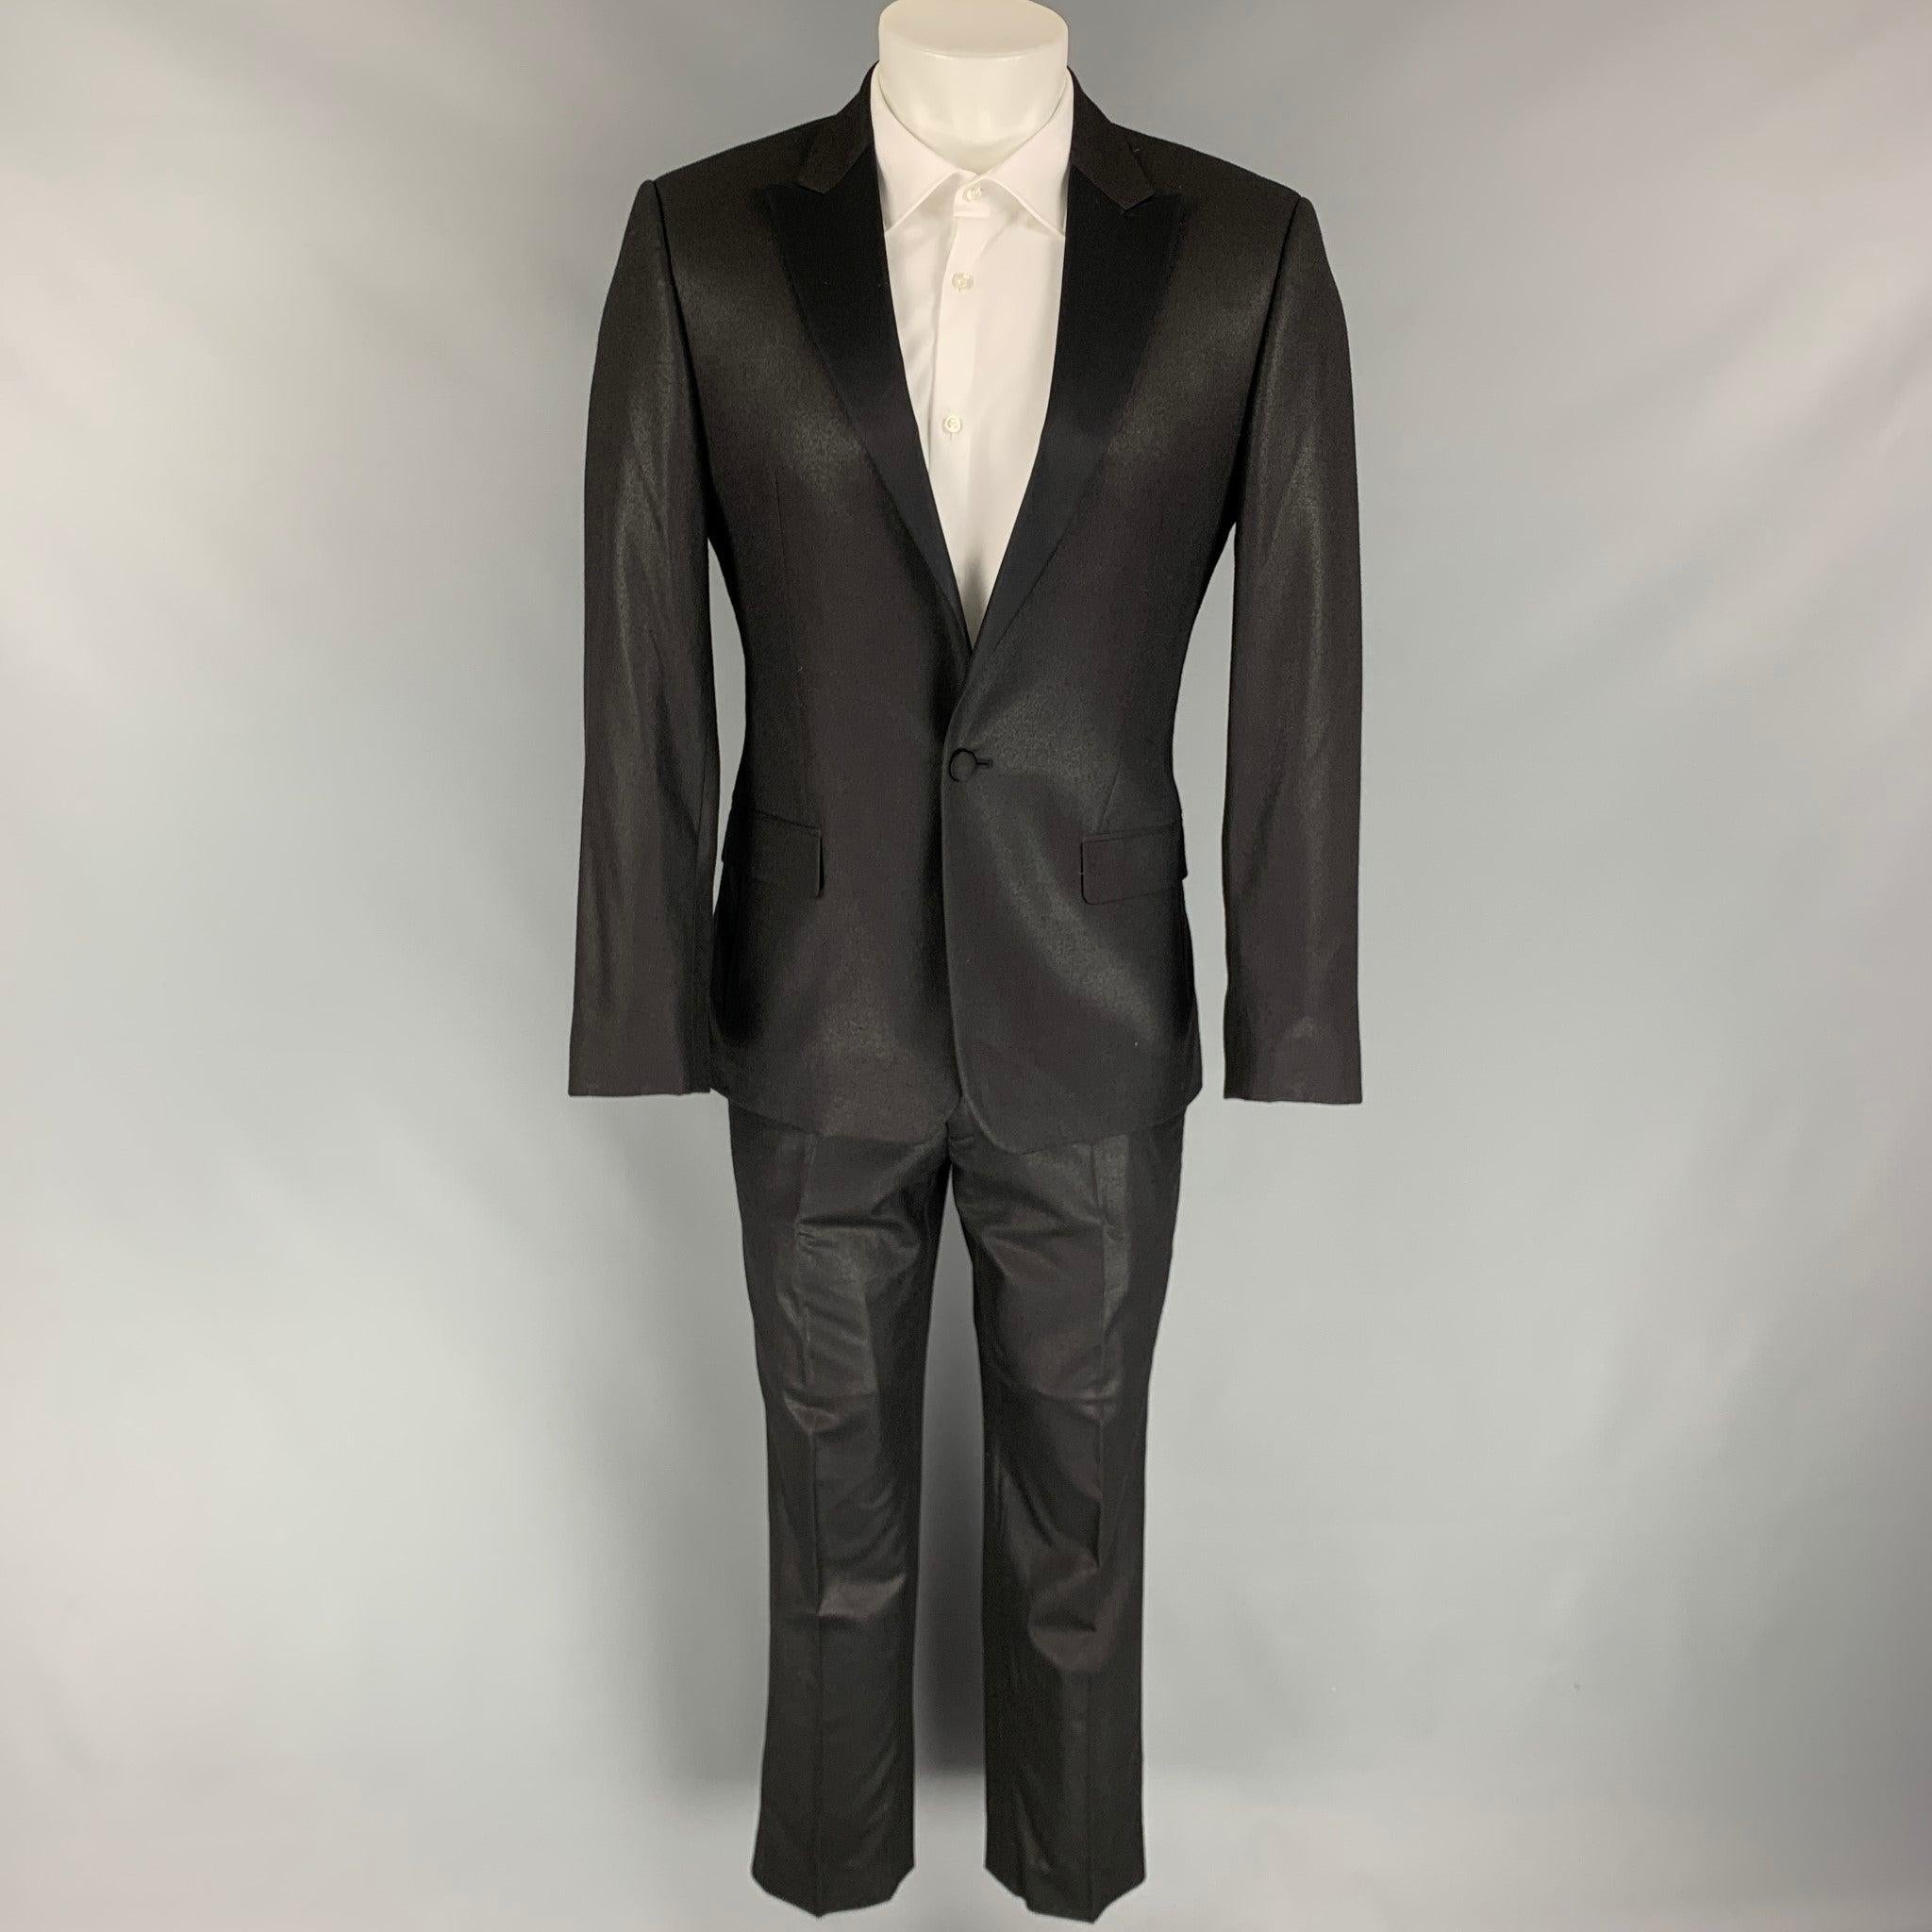 CALVIN KLEIN COLLECTION tuxedo
suit comes in a black sparkle wool with a full liner and includes a single breasted, single button sport coat with a peak lapel and matching flat front trousers. New With Tags.  

Marked:   46/36 

Measurements: 
 